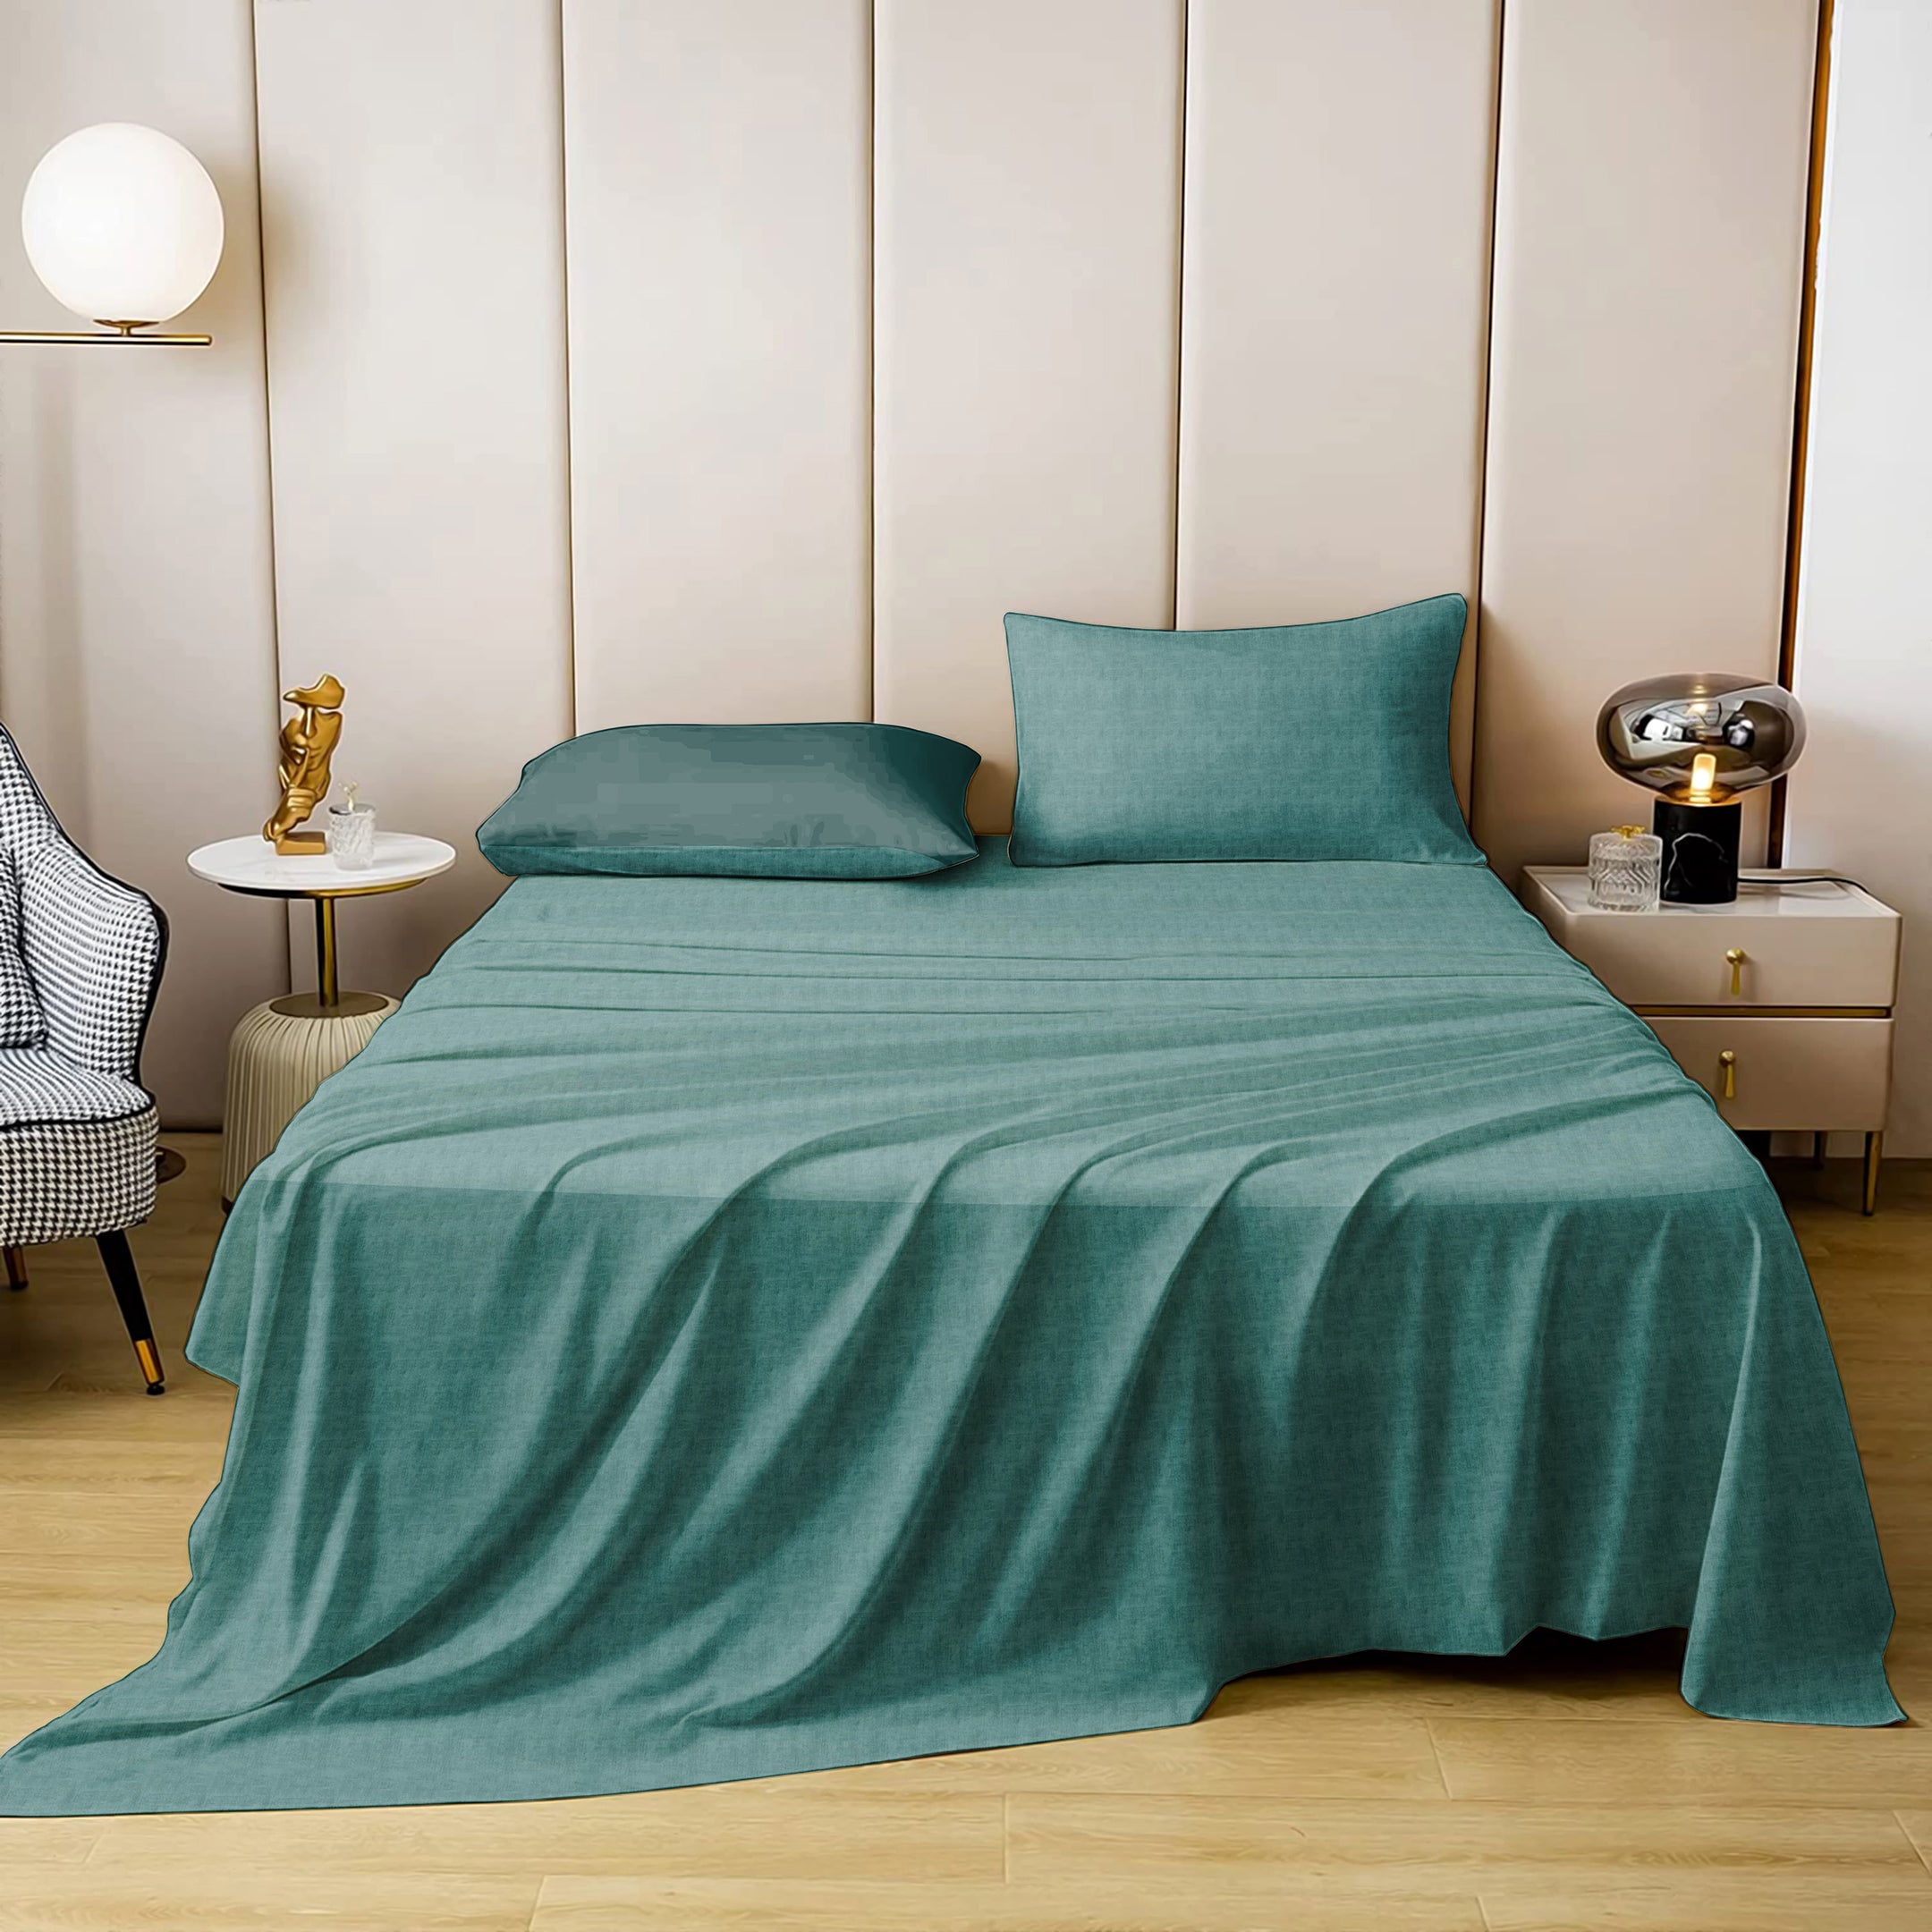 Jodhpur Texture Bedsheet for Double Bed with 2 PillowCovers King Size (104" X 90") Teal